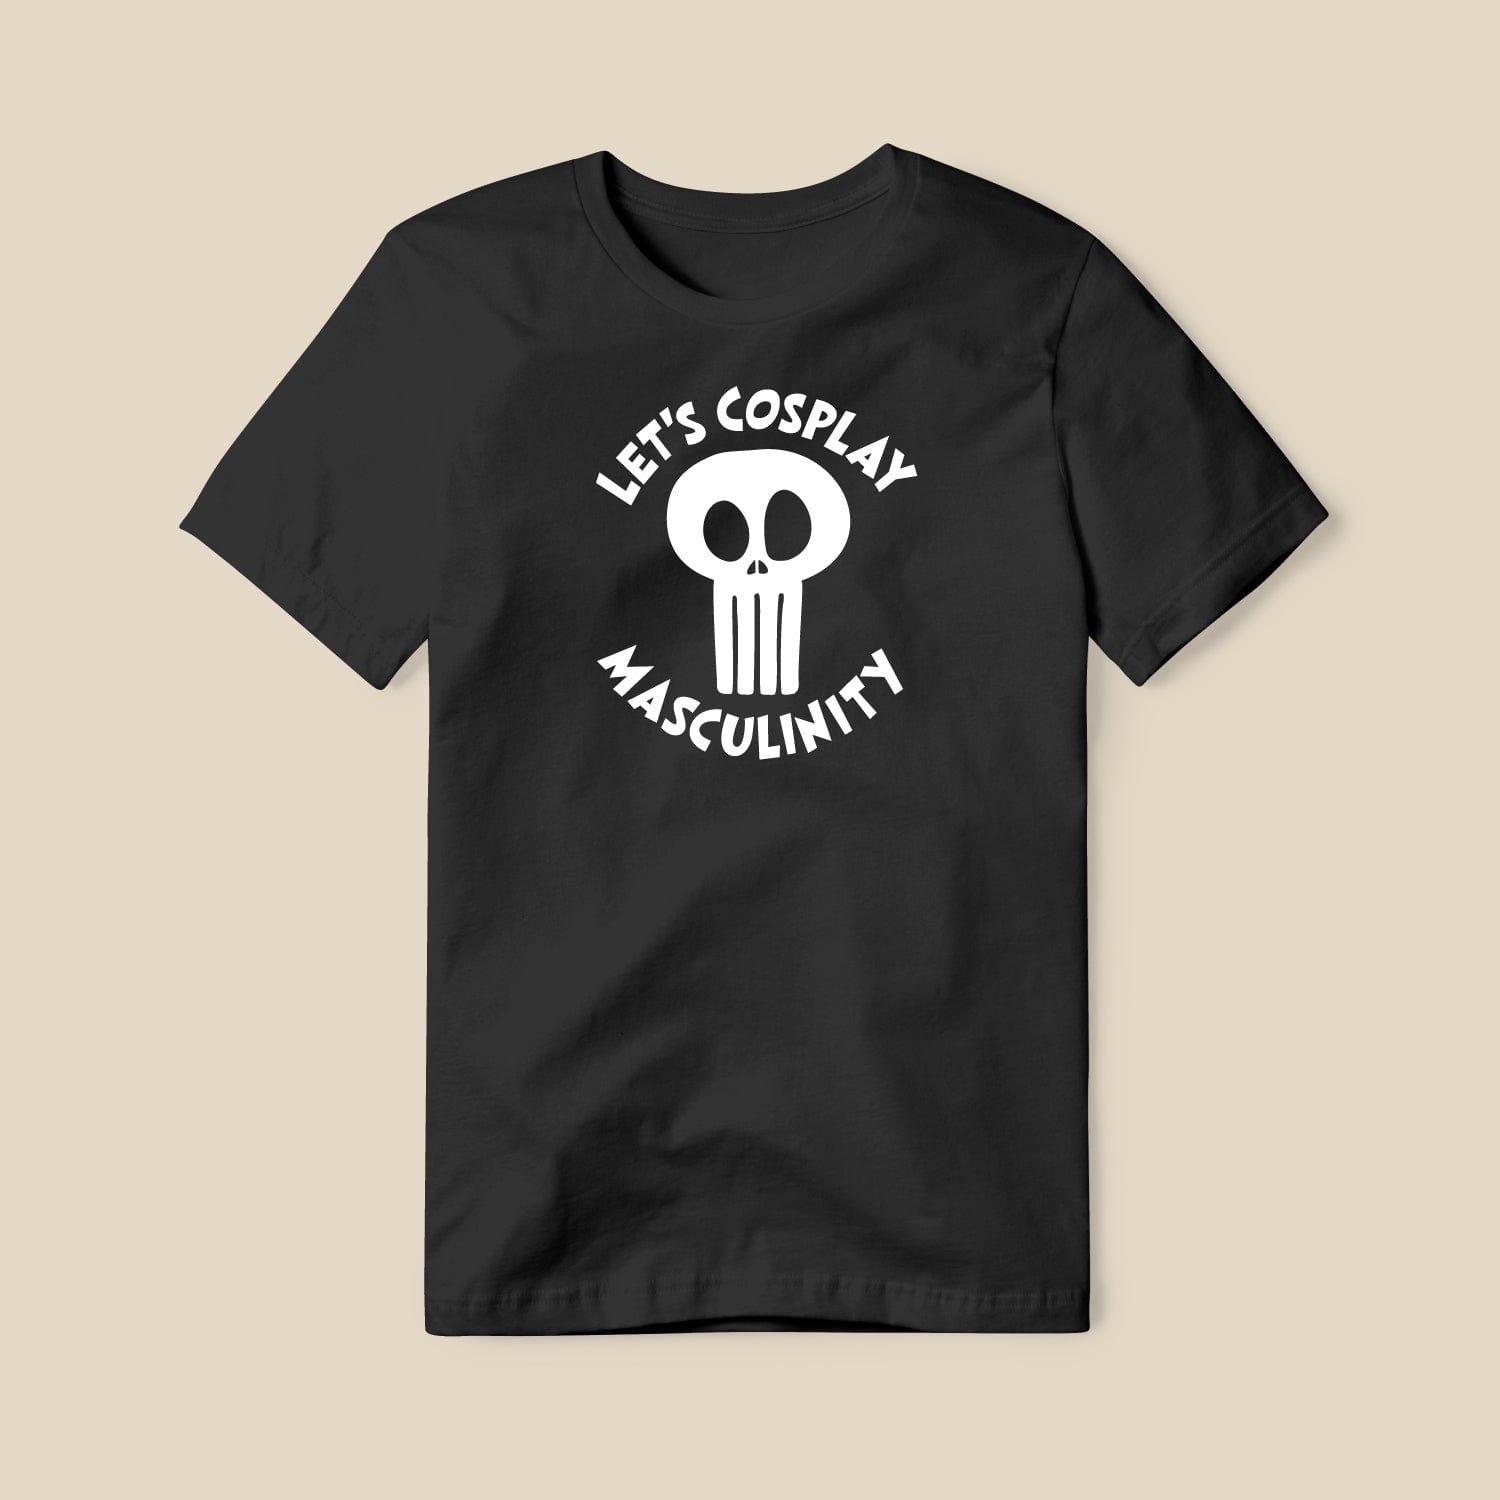 Let's Cosplay Masculinity T-shirt